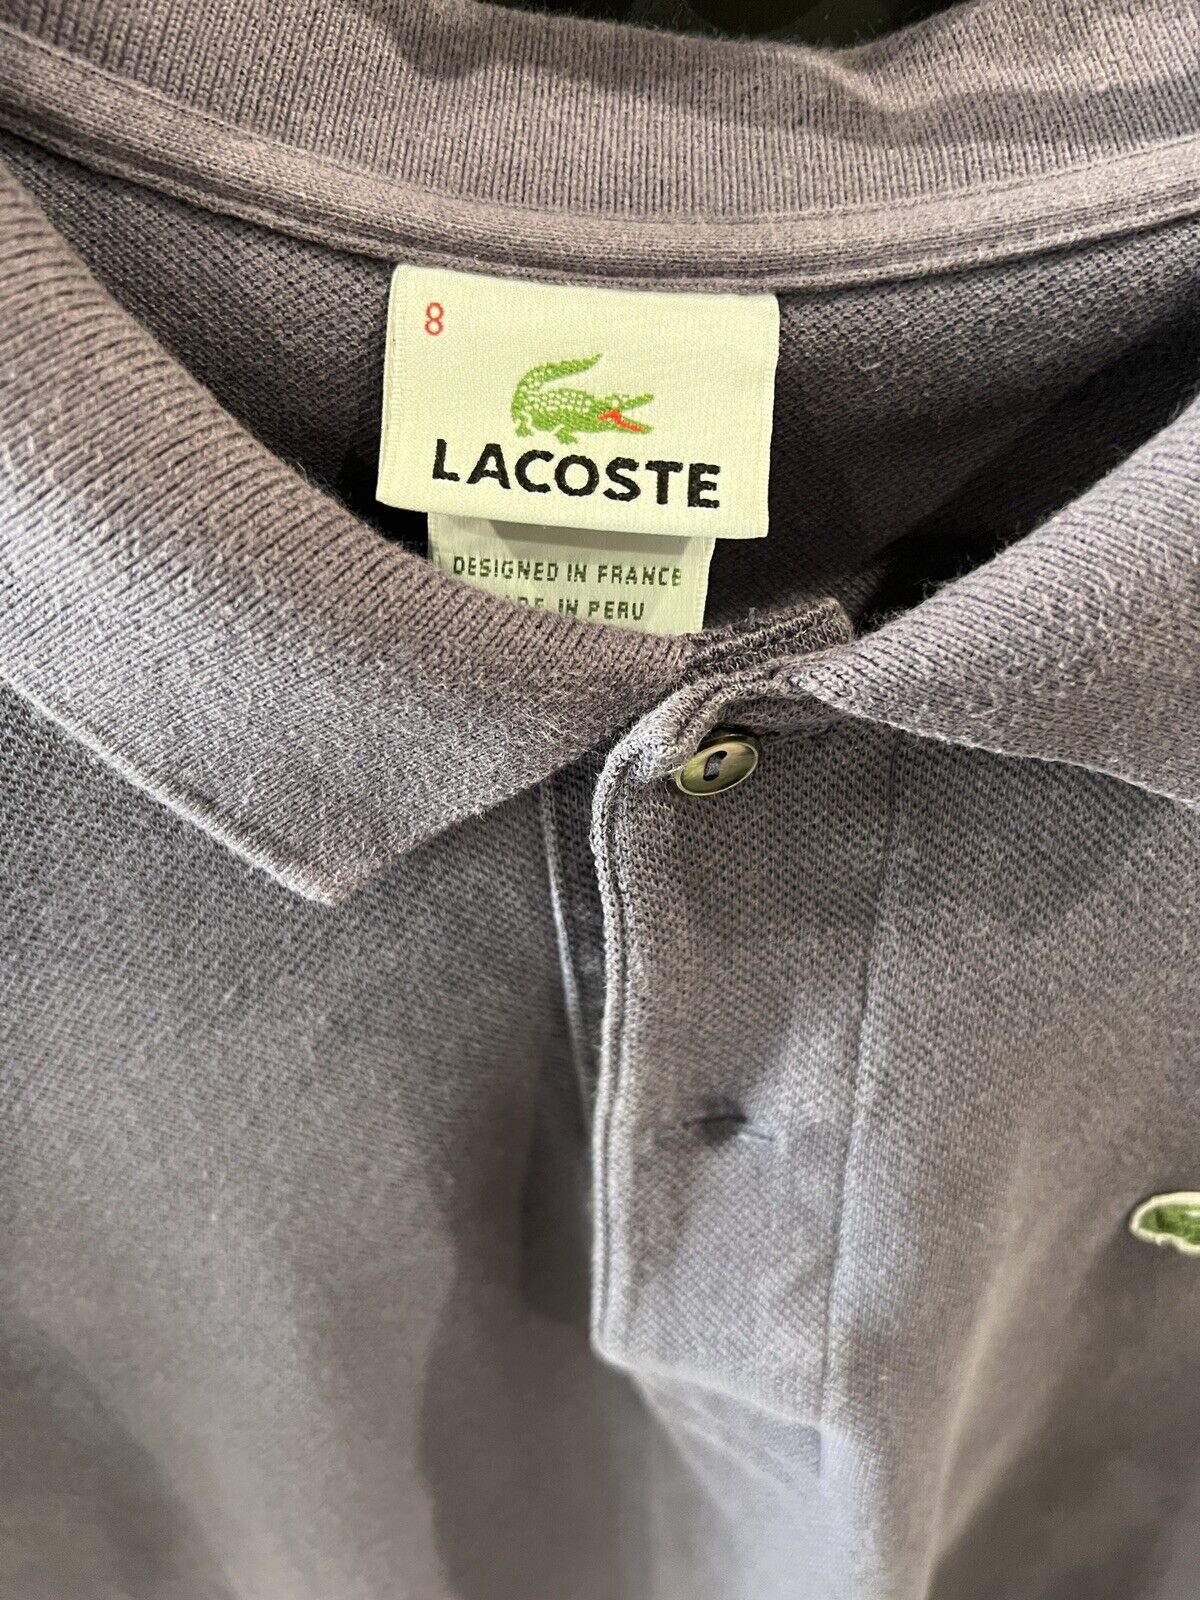 Lacoste polo mens size 8 shirt - image 3